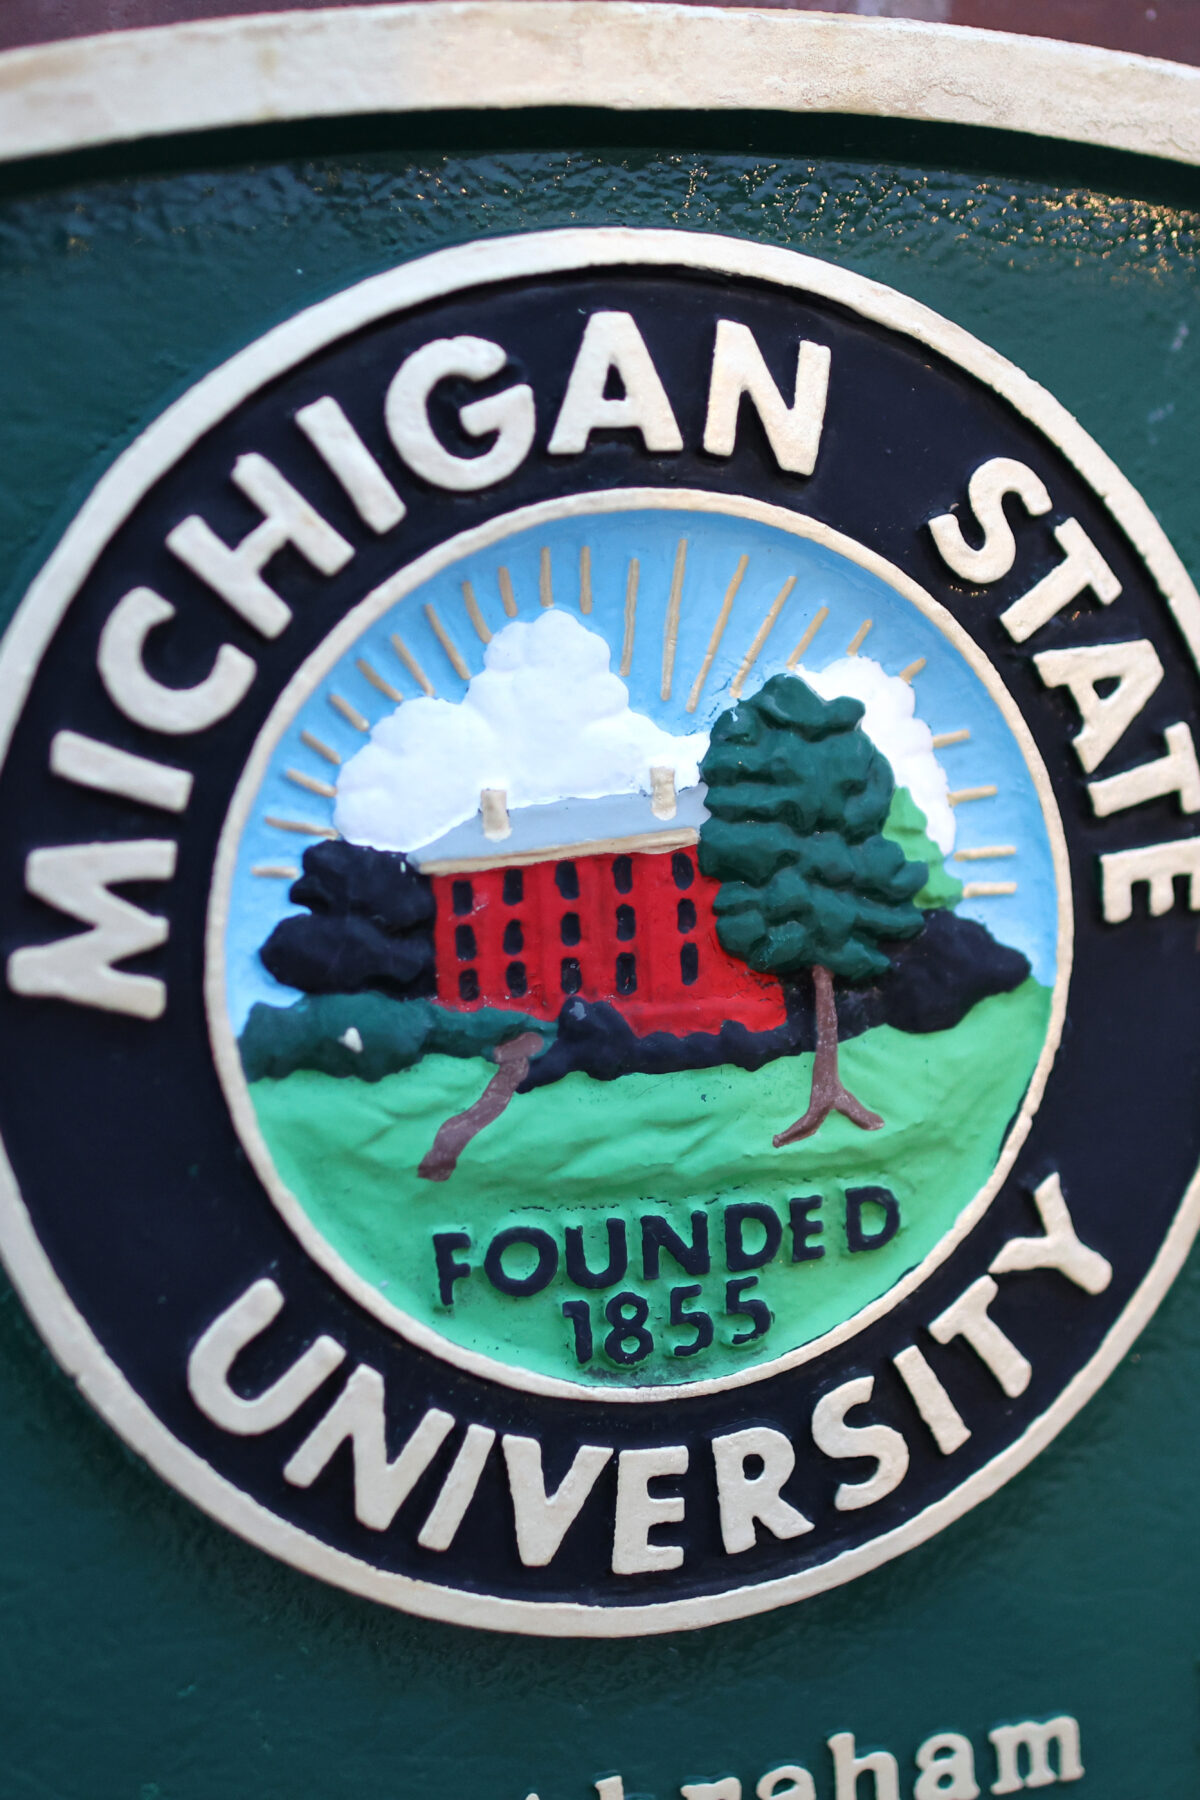 EAST LANSING, MICHIGAN - FEBRUARY 14: A Michigan State University ( MSU ) sign is shown on campus on February 14, 2023 in East Lansing, Michigan. A gunman opened at two locations on the campus last night, killing three students and injuring several others before taking his own life. (Photo by Scott Olson/Getty Images)